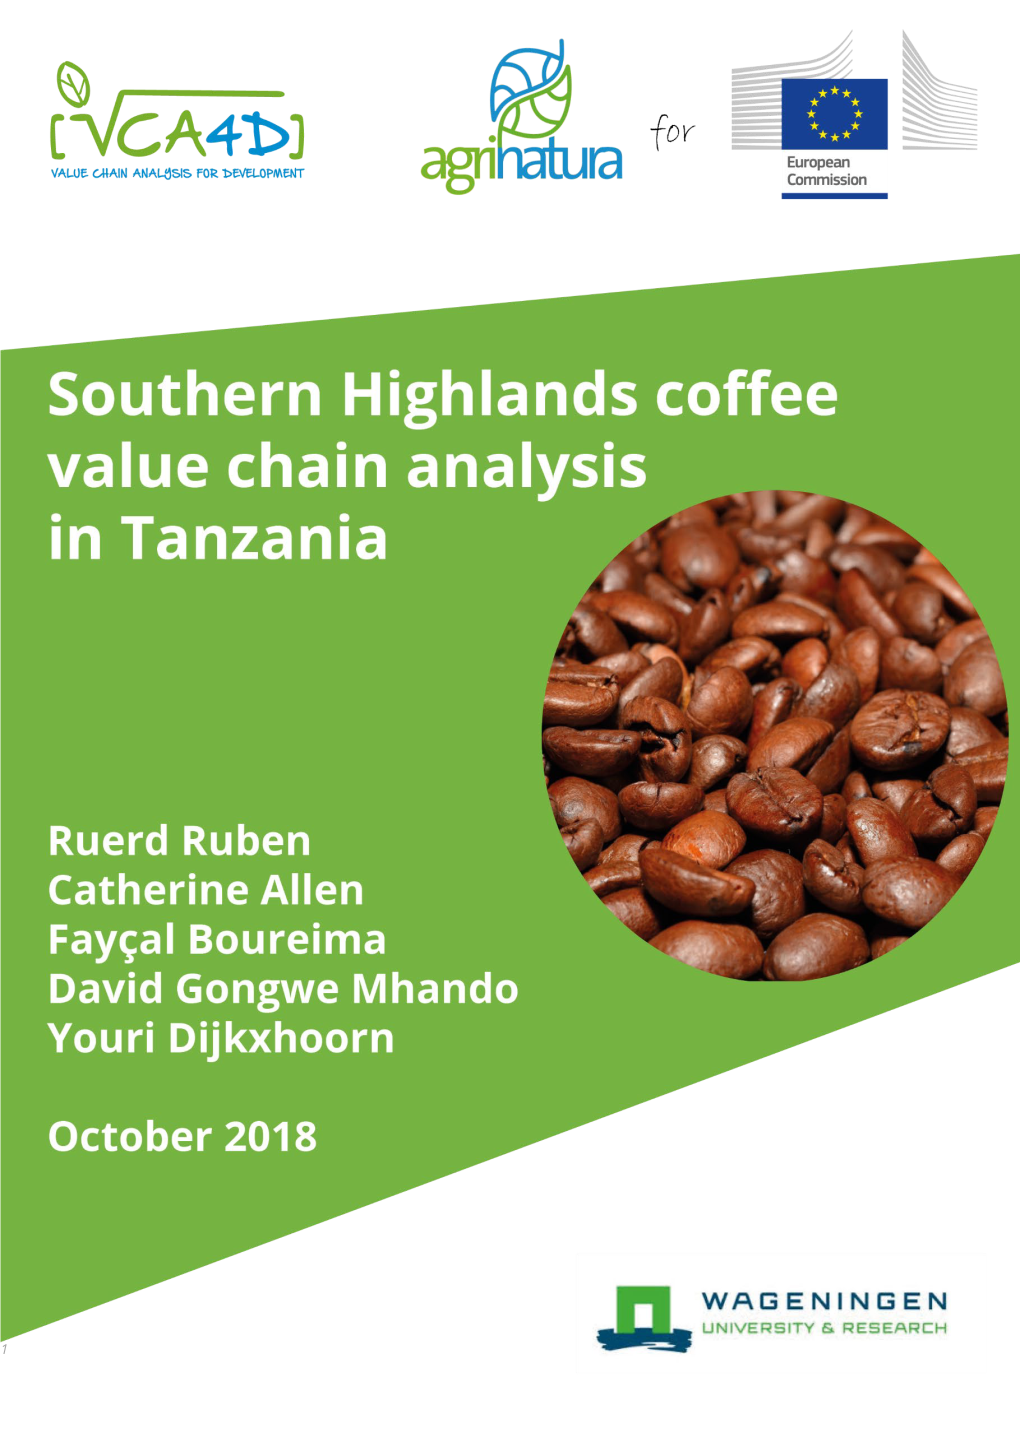 12. VCA4D Southern Highlands of Tanzania.Coffee